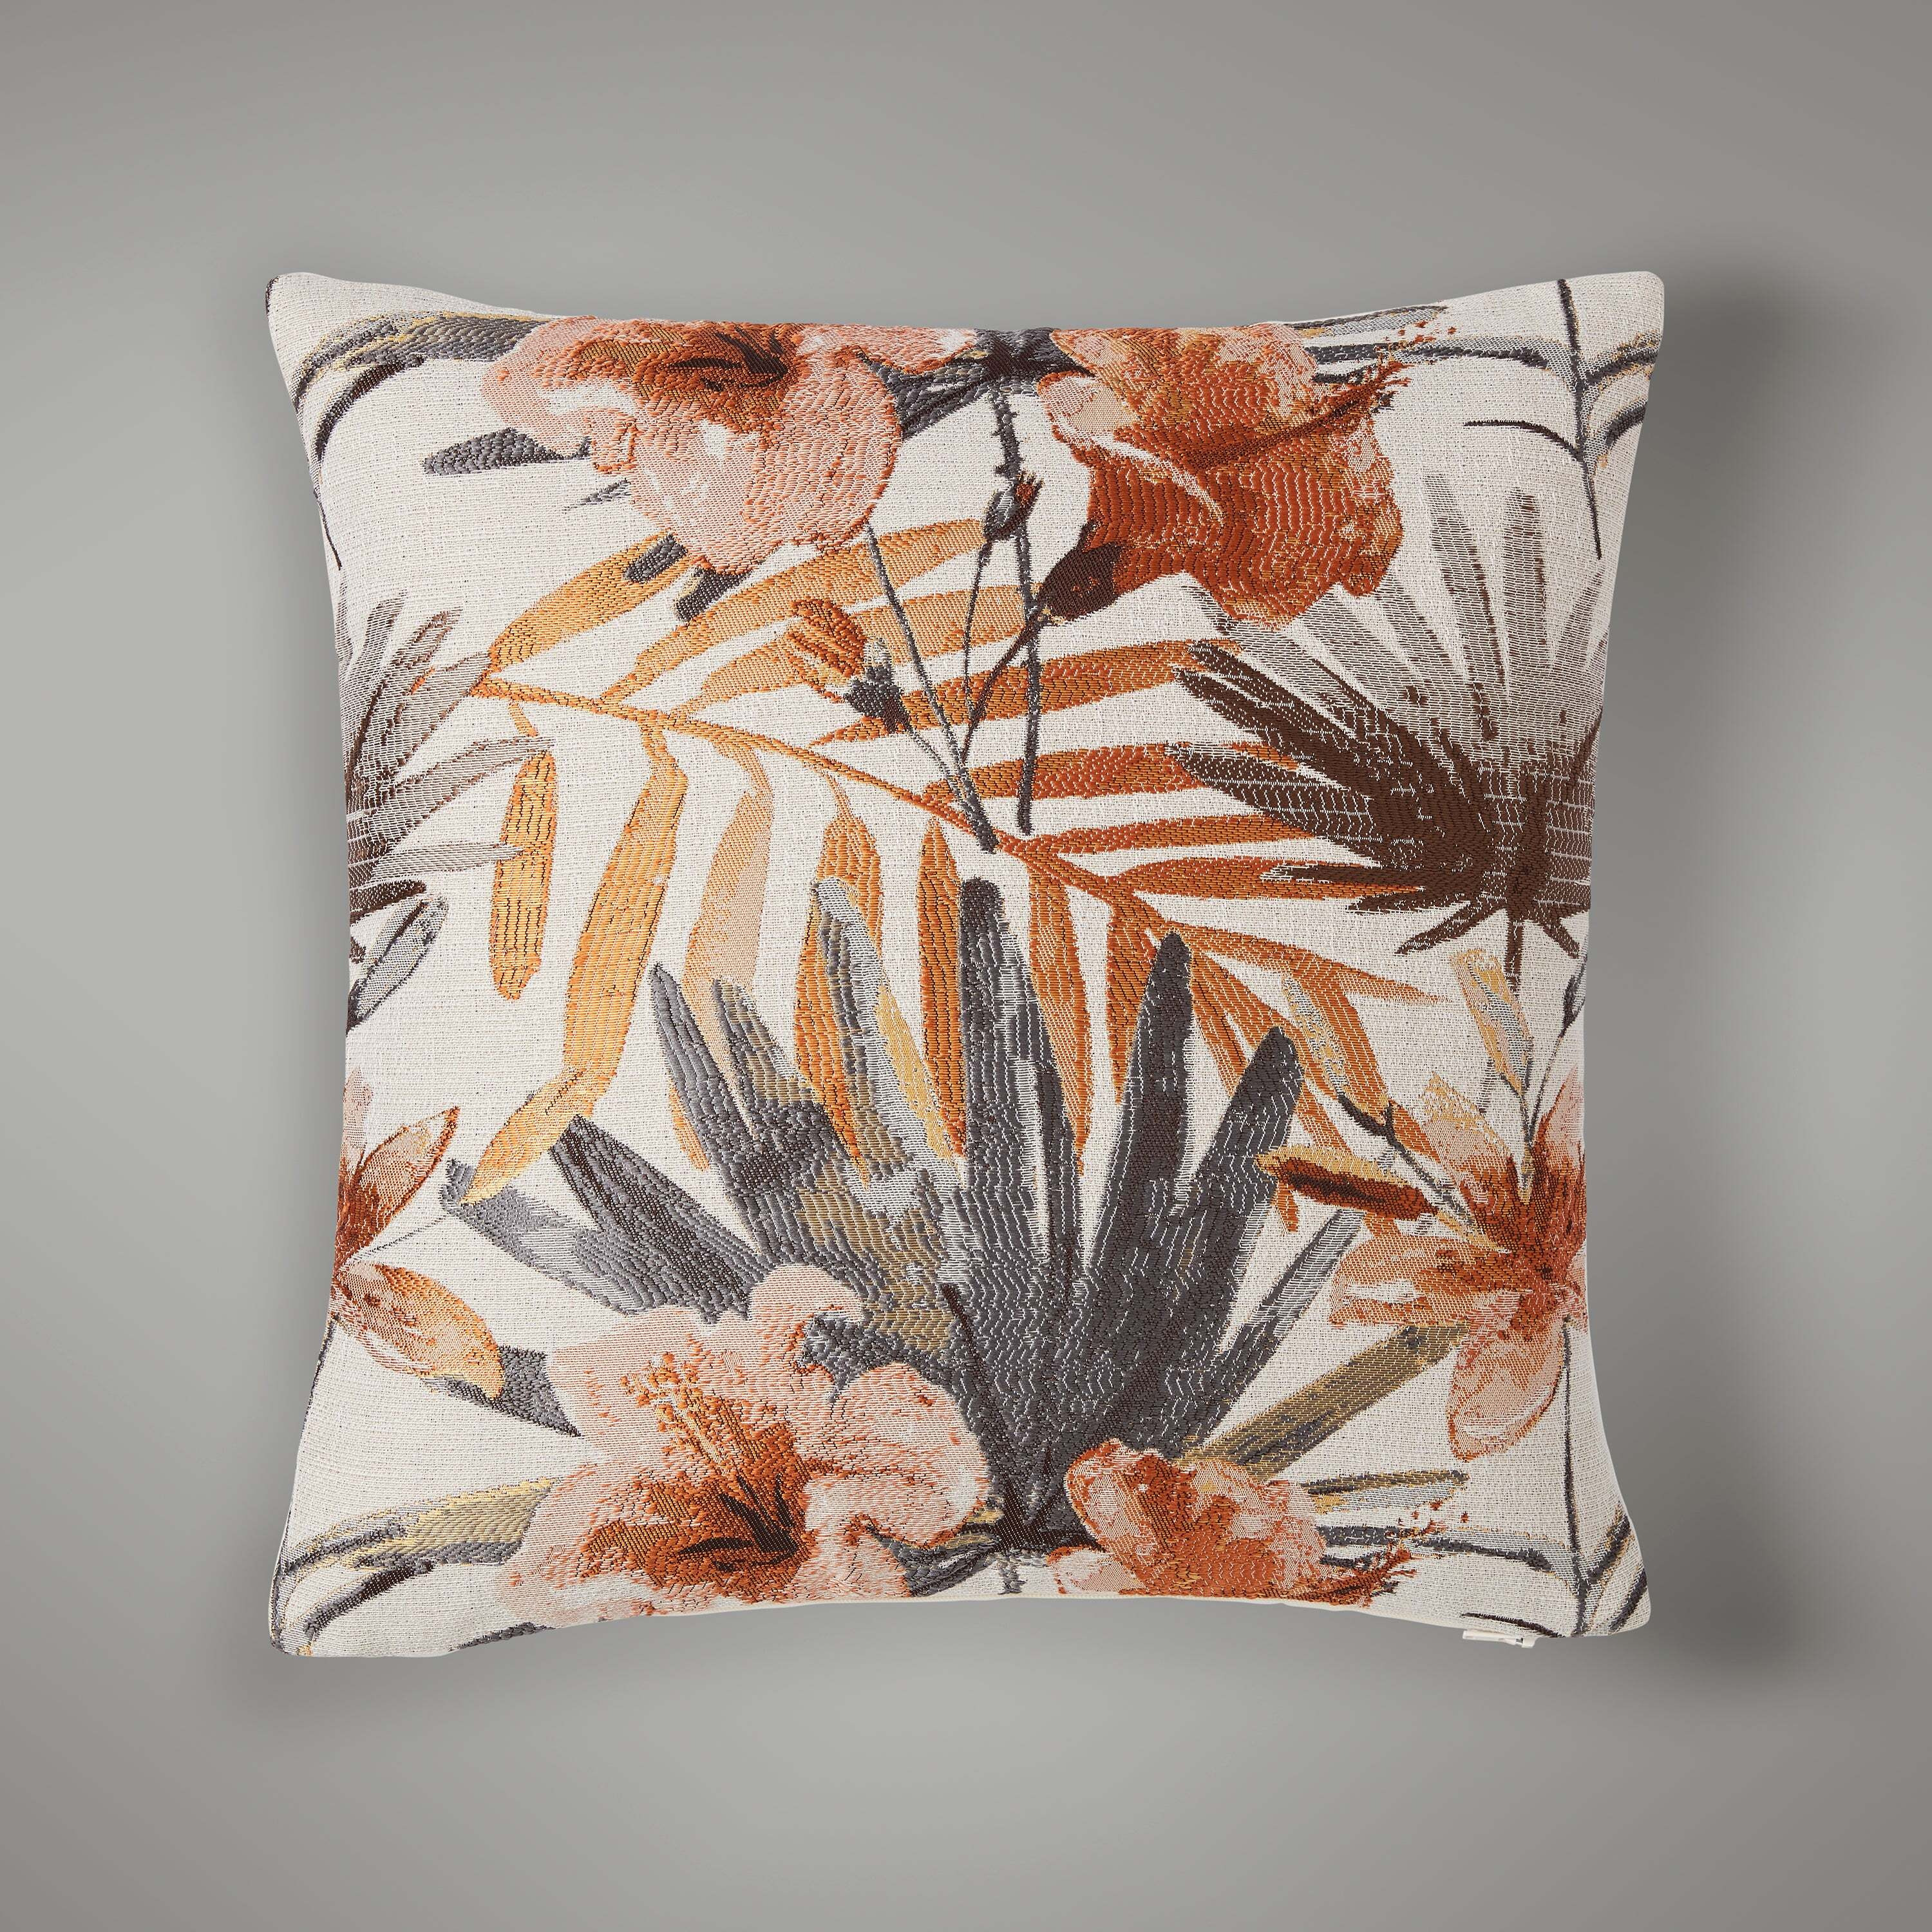 Natural Leaf Tapestry Cushion Brown/Grey/White